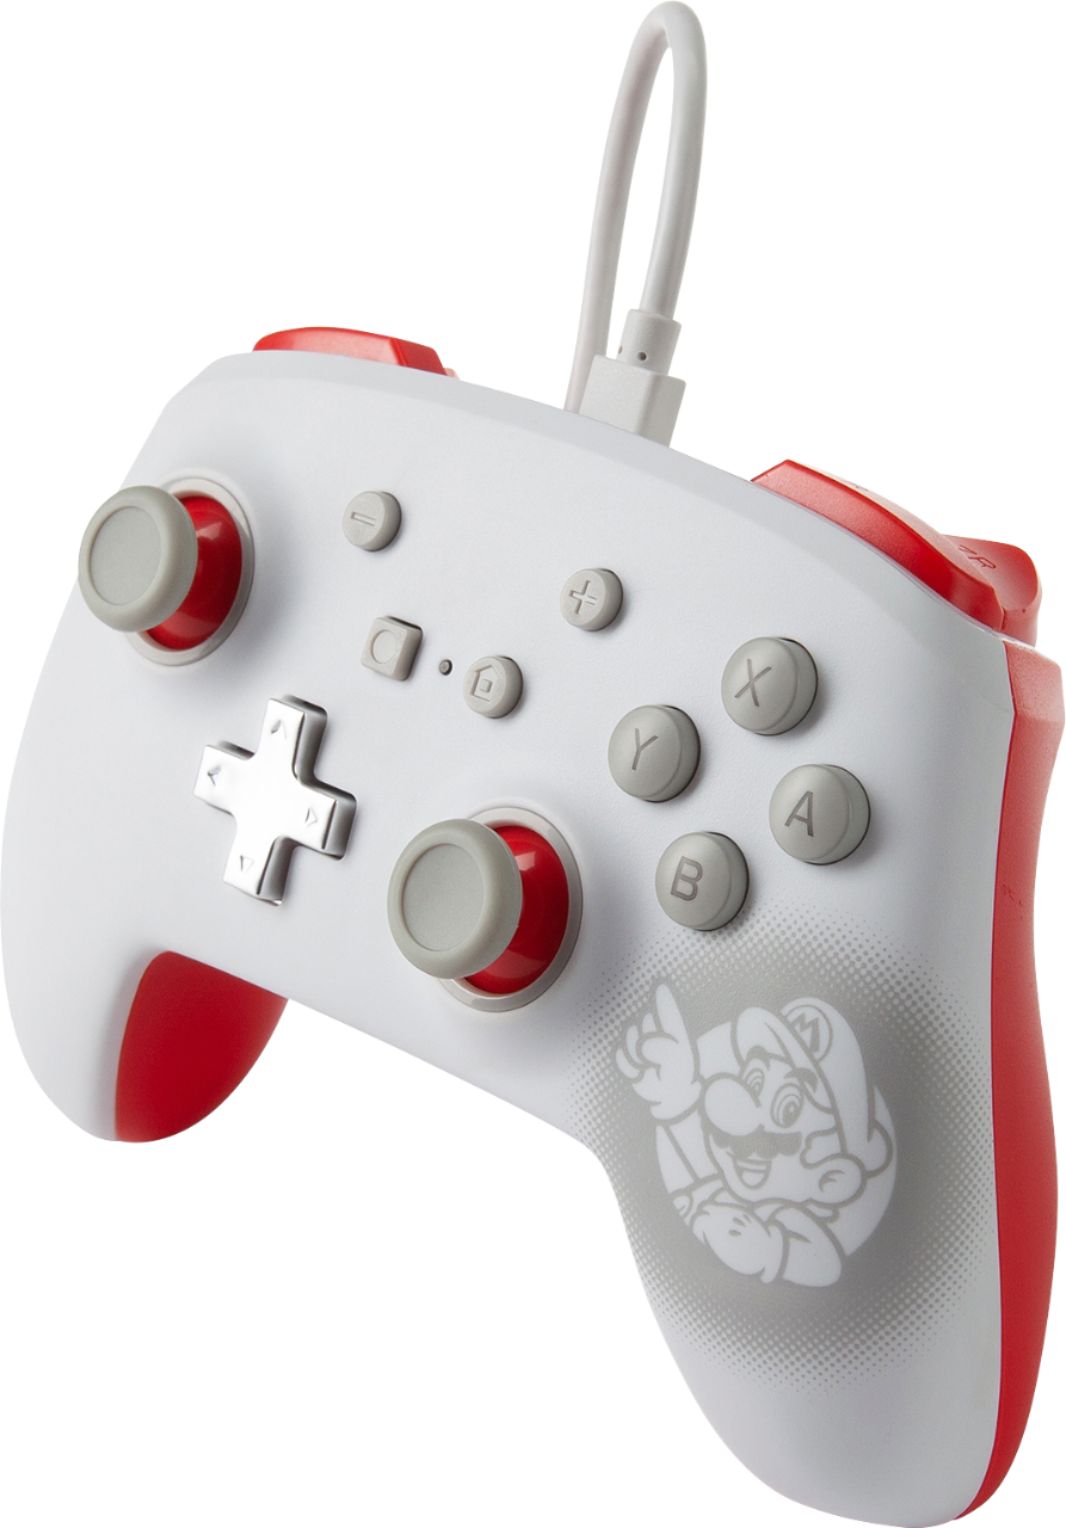 power a enhanced wired controller